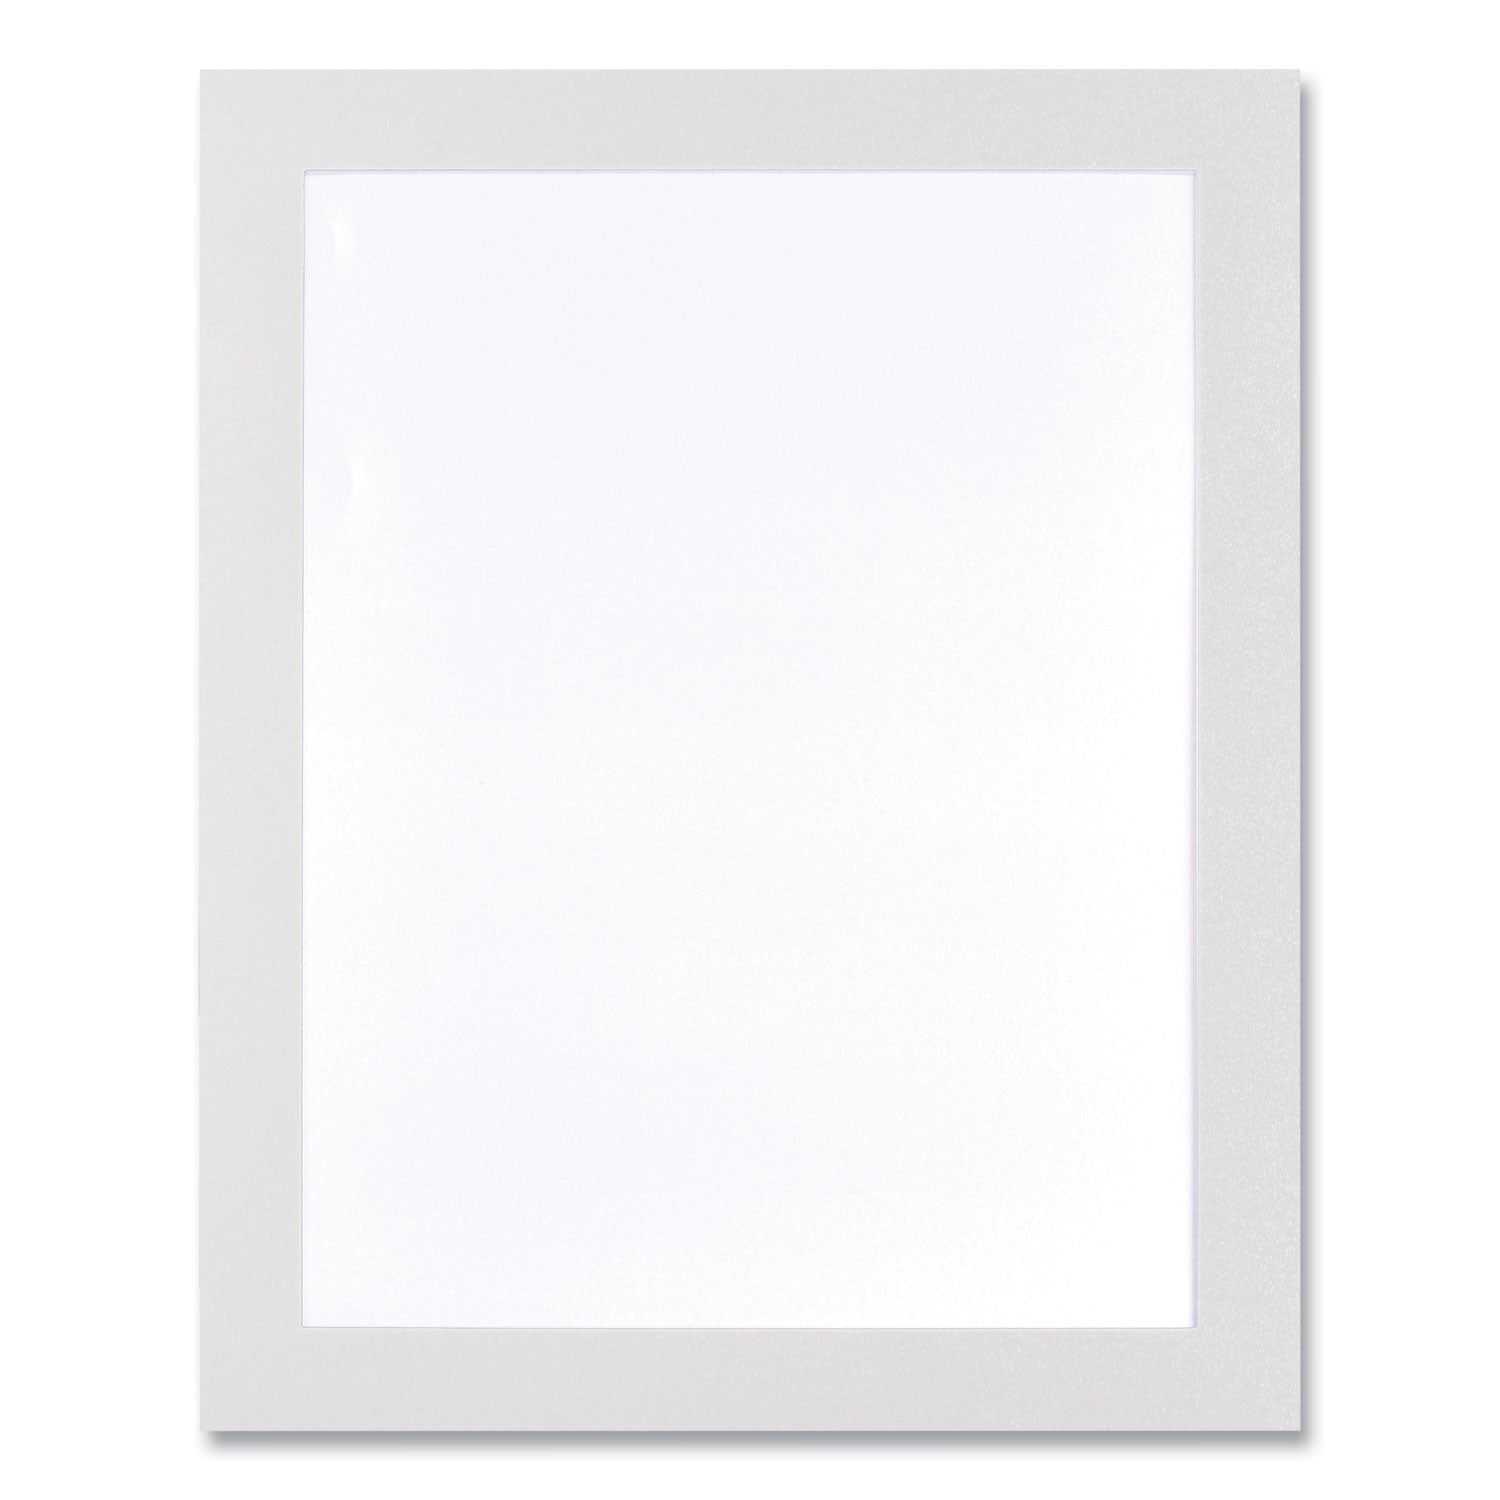 self-adhesive-sign-holders-85-x-11-insert-clear-with-white-border-2-pack_def68776w - 1